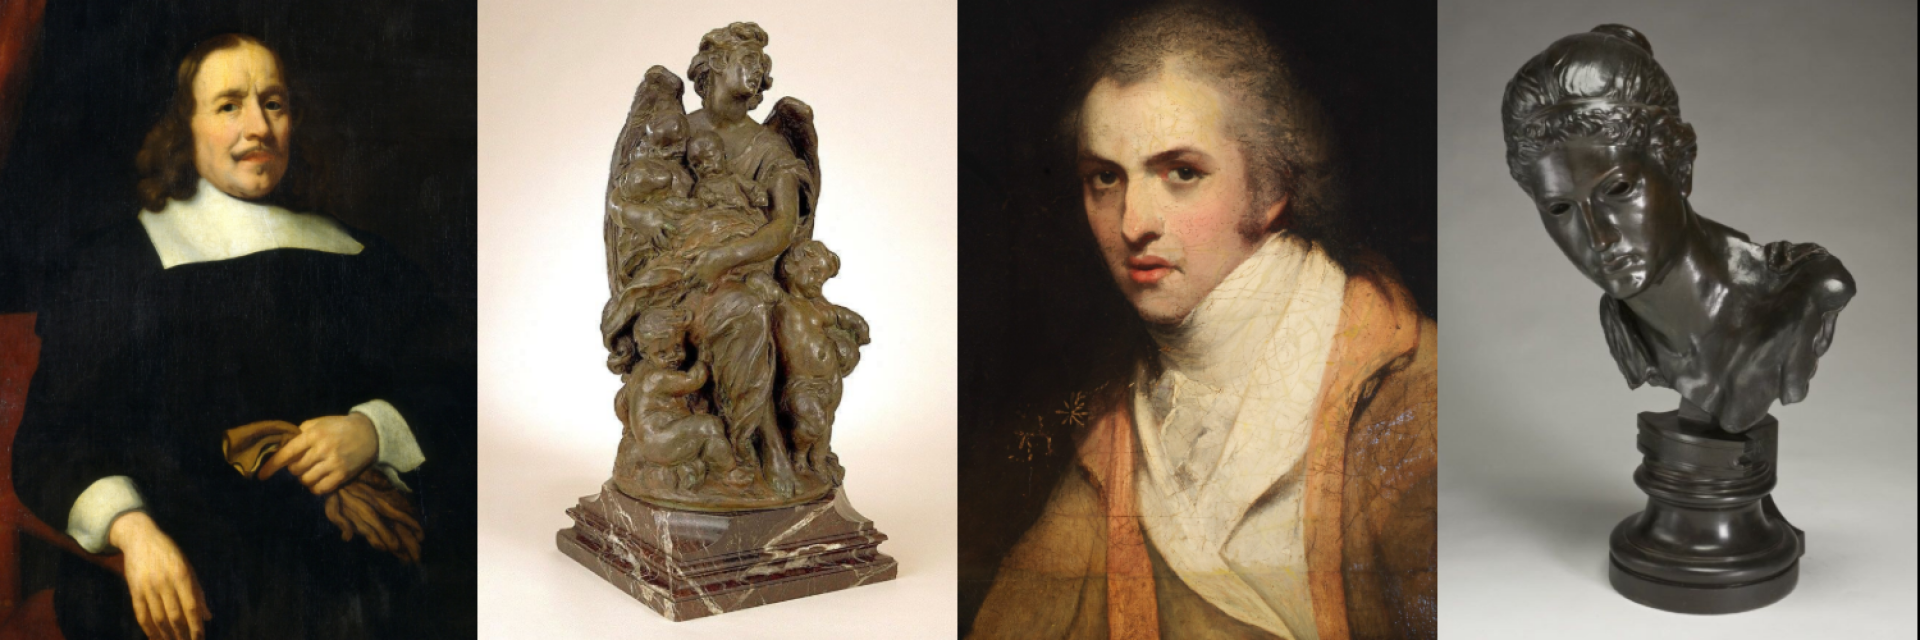 Four pictures of collection objects: painting of a man, sculpture of an angel, painting of a woman, sculputre of a head